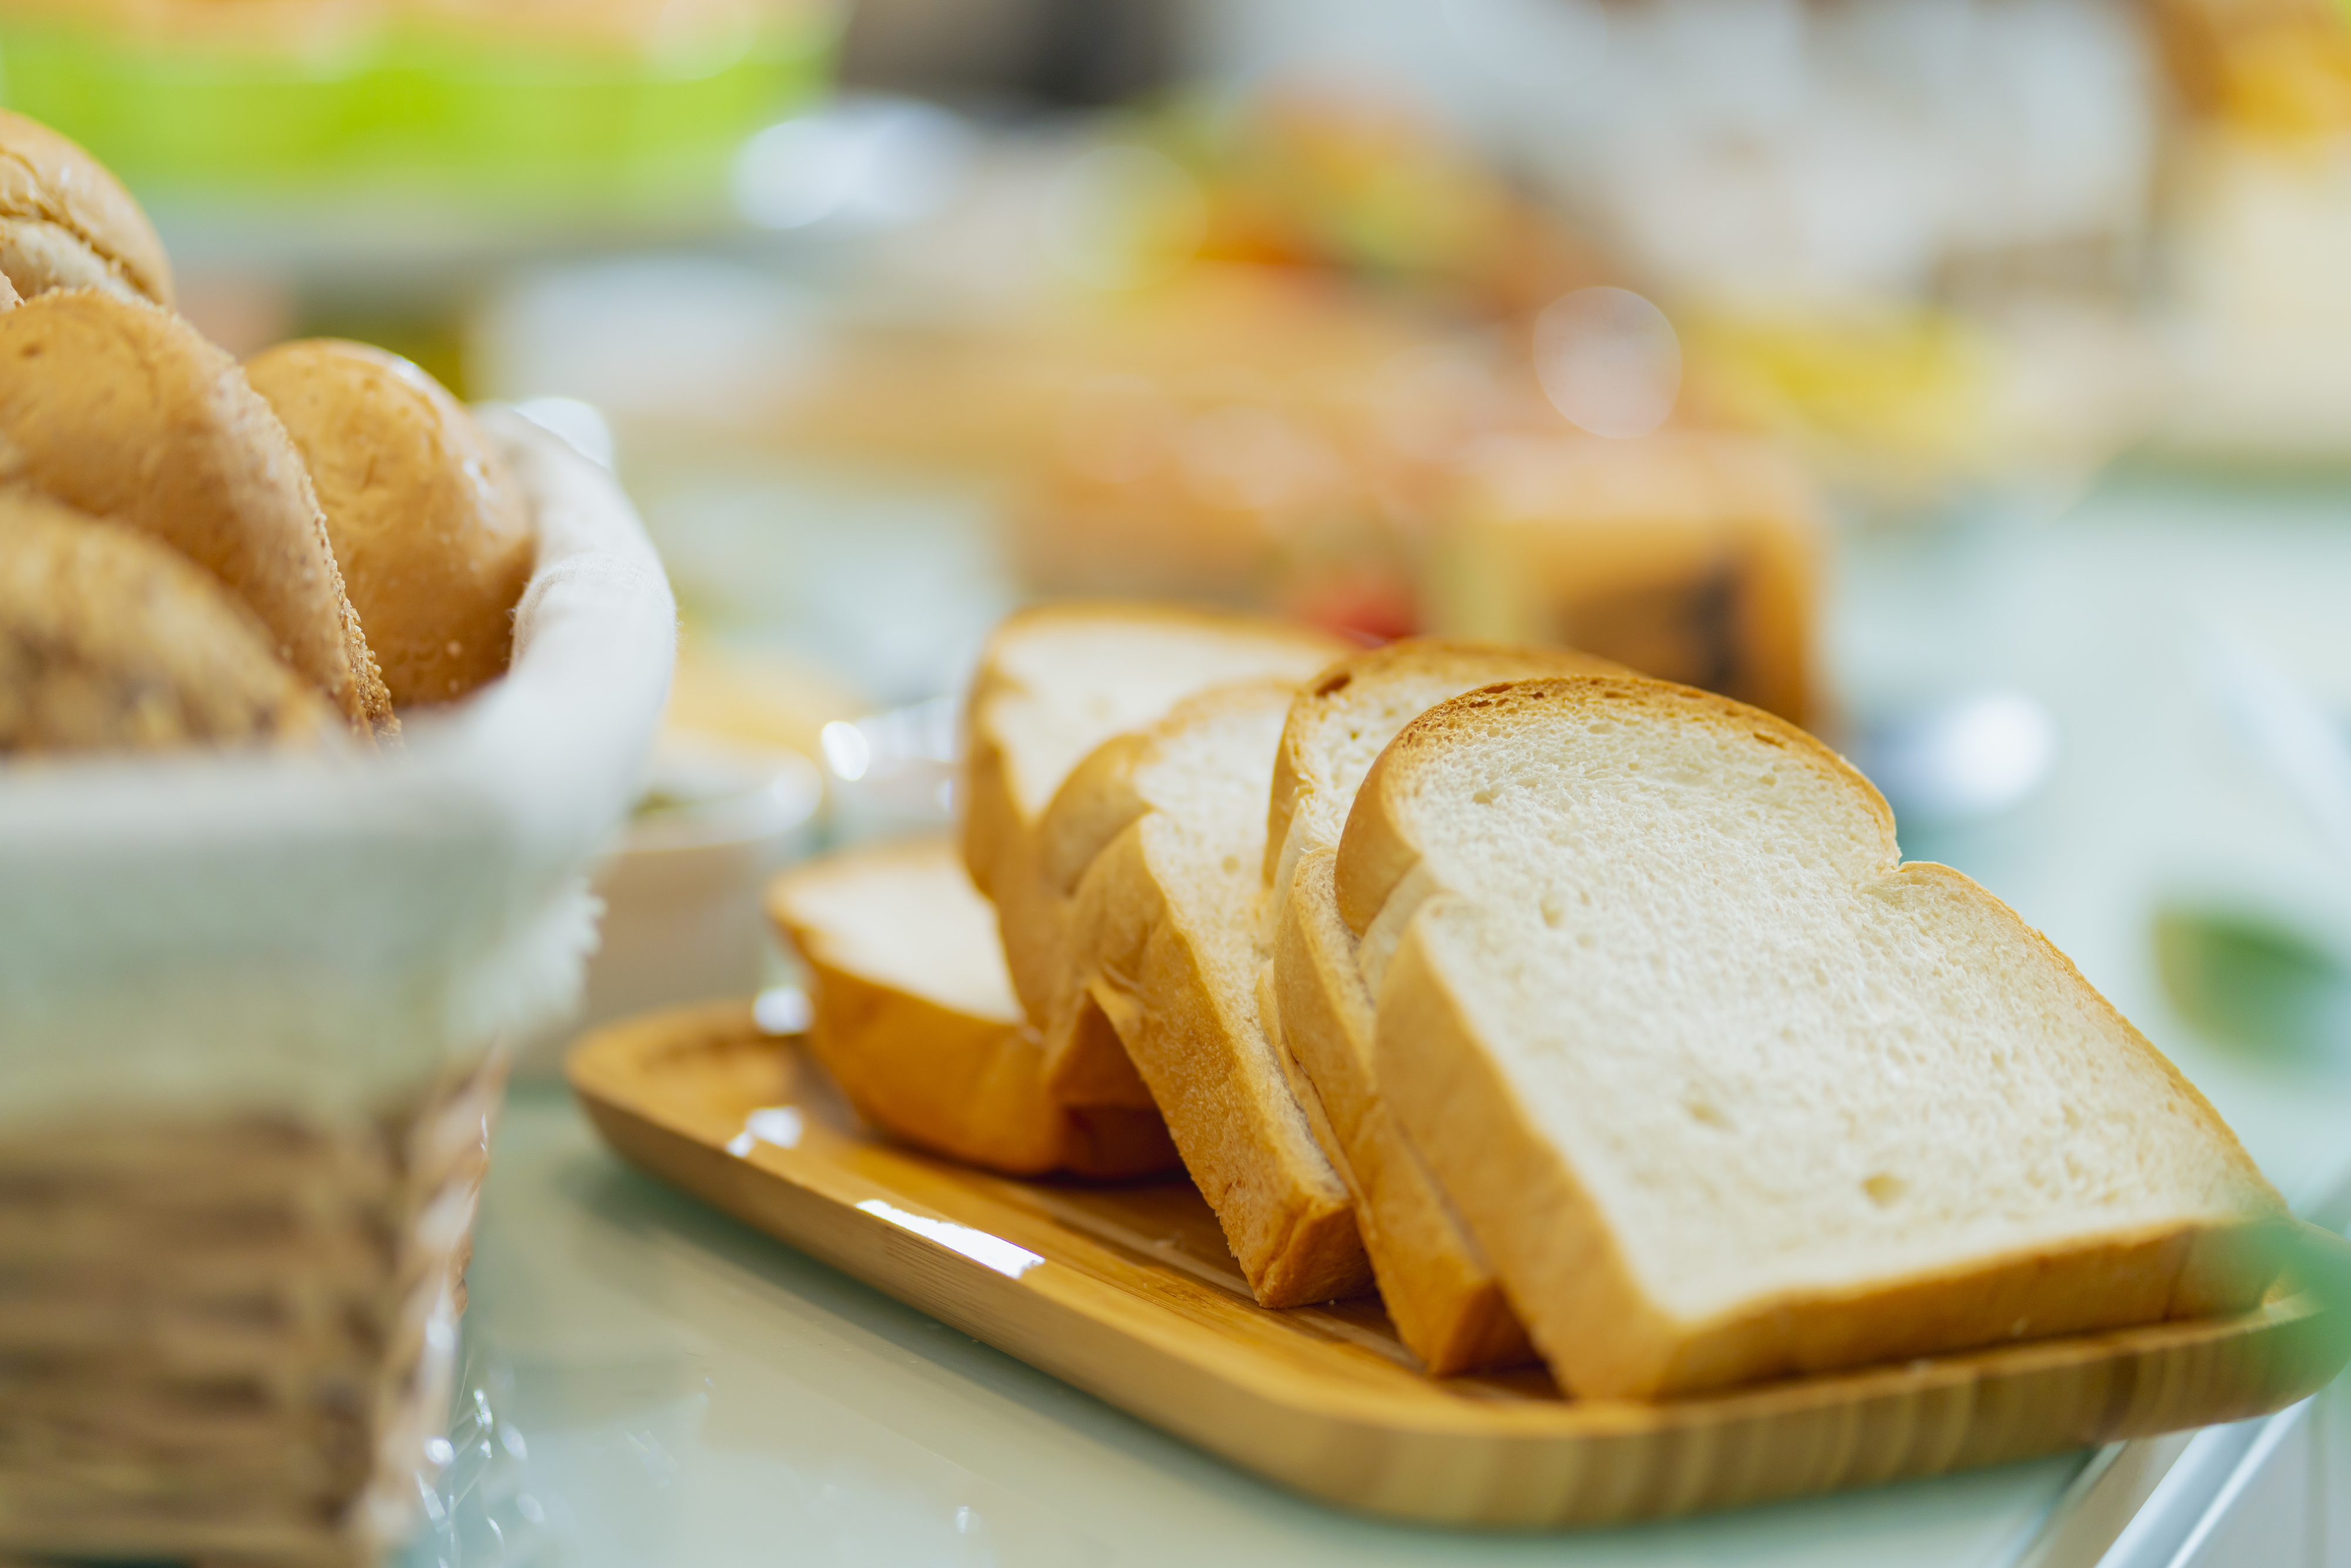 Sliced white bread on a plate, with additional food items blurred in the background